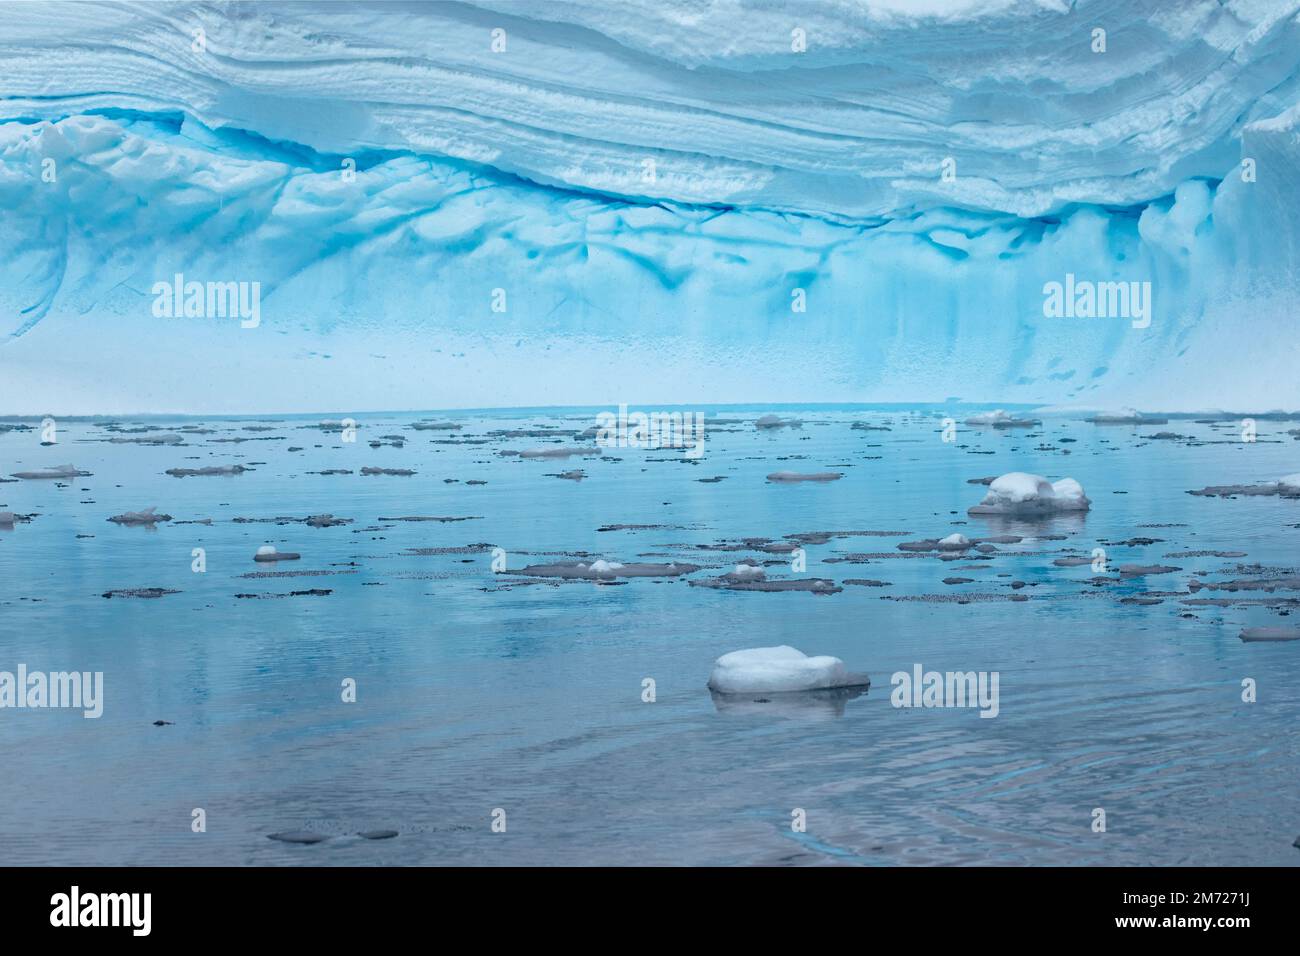 Large Icebergs float in the still water in Antarctica, with blue glacier ice and layers of snow. Stock Photo